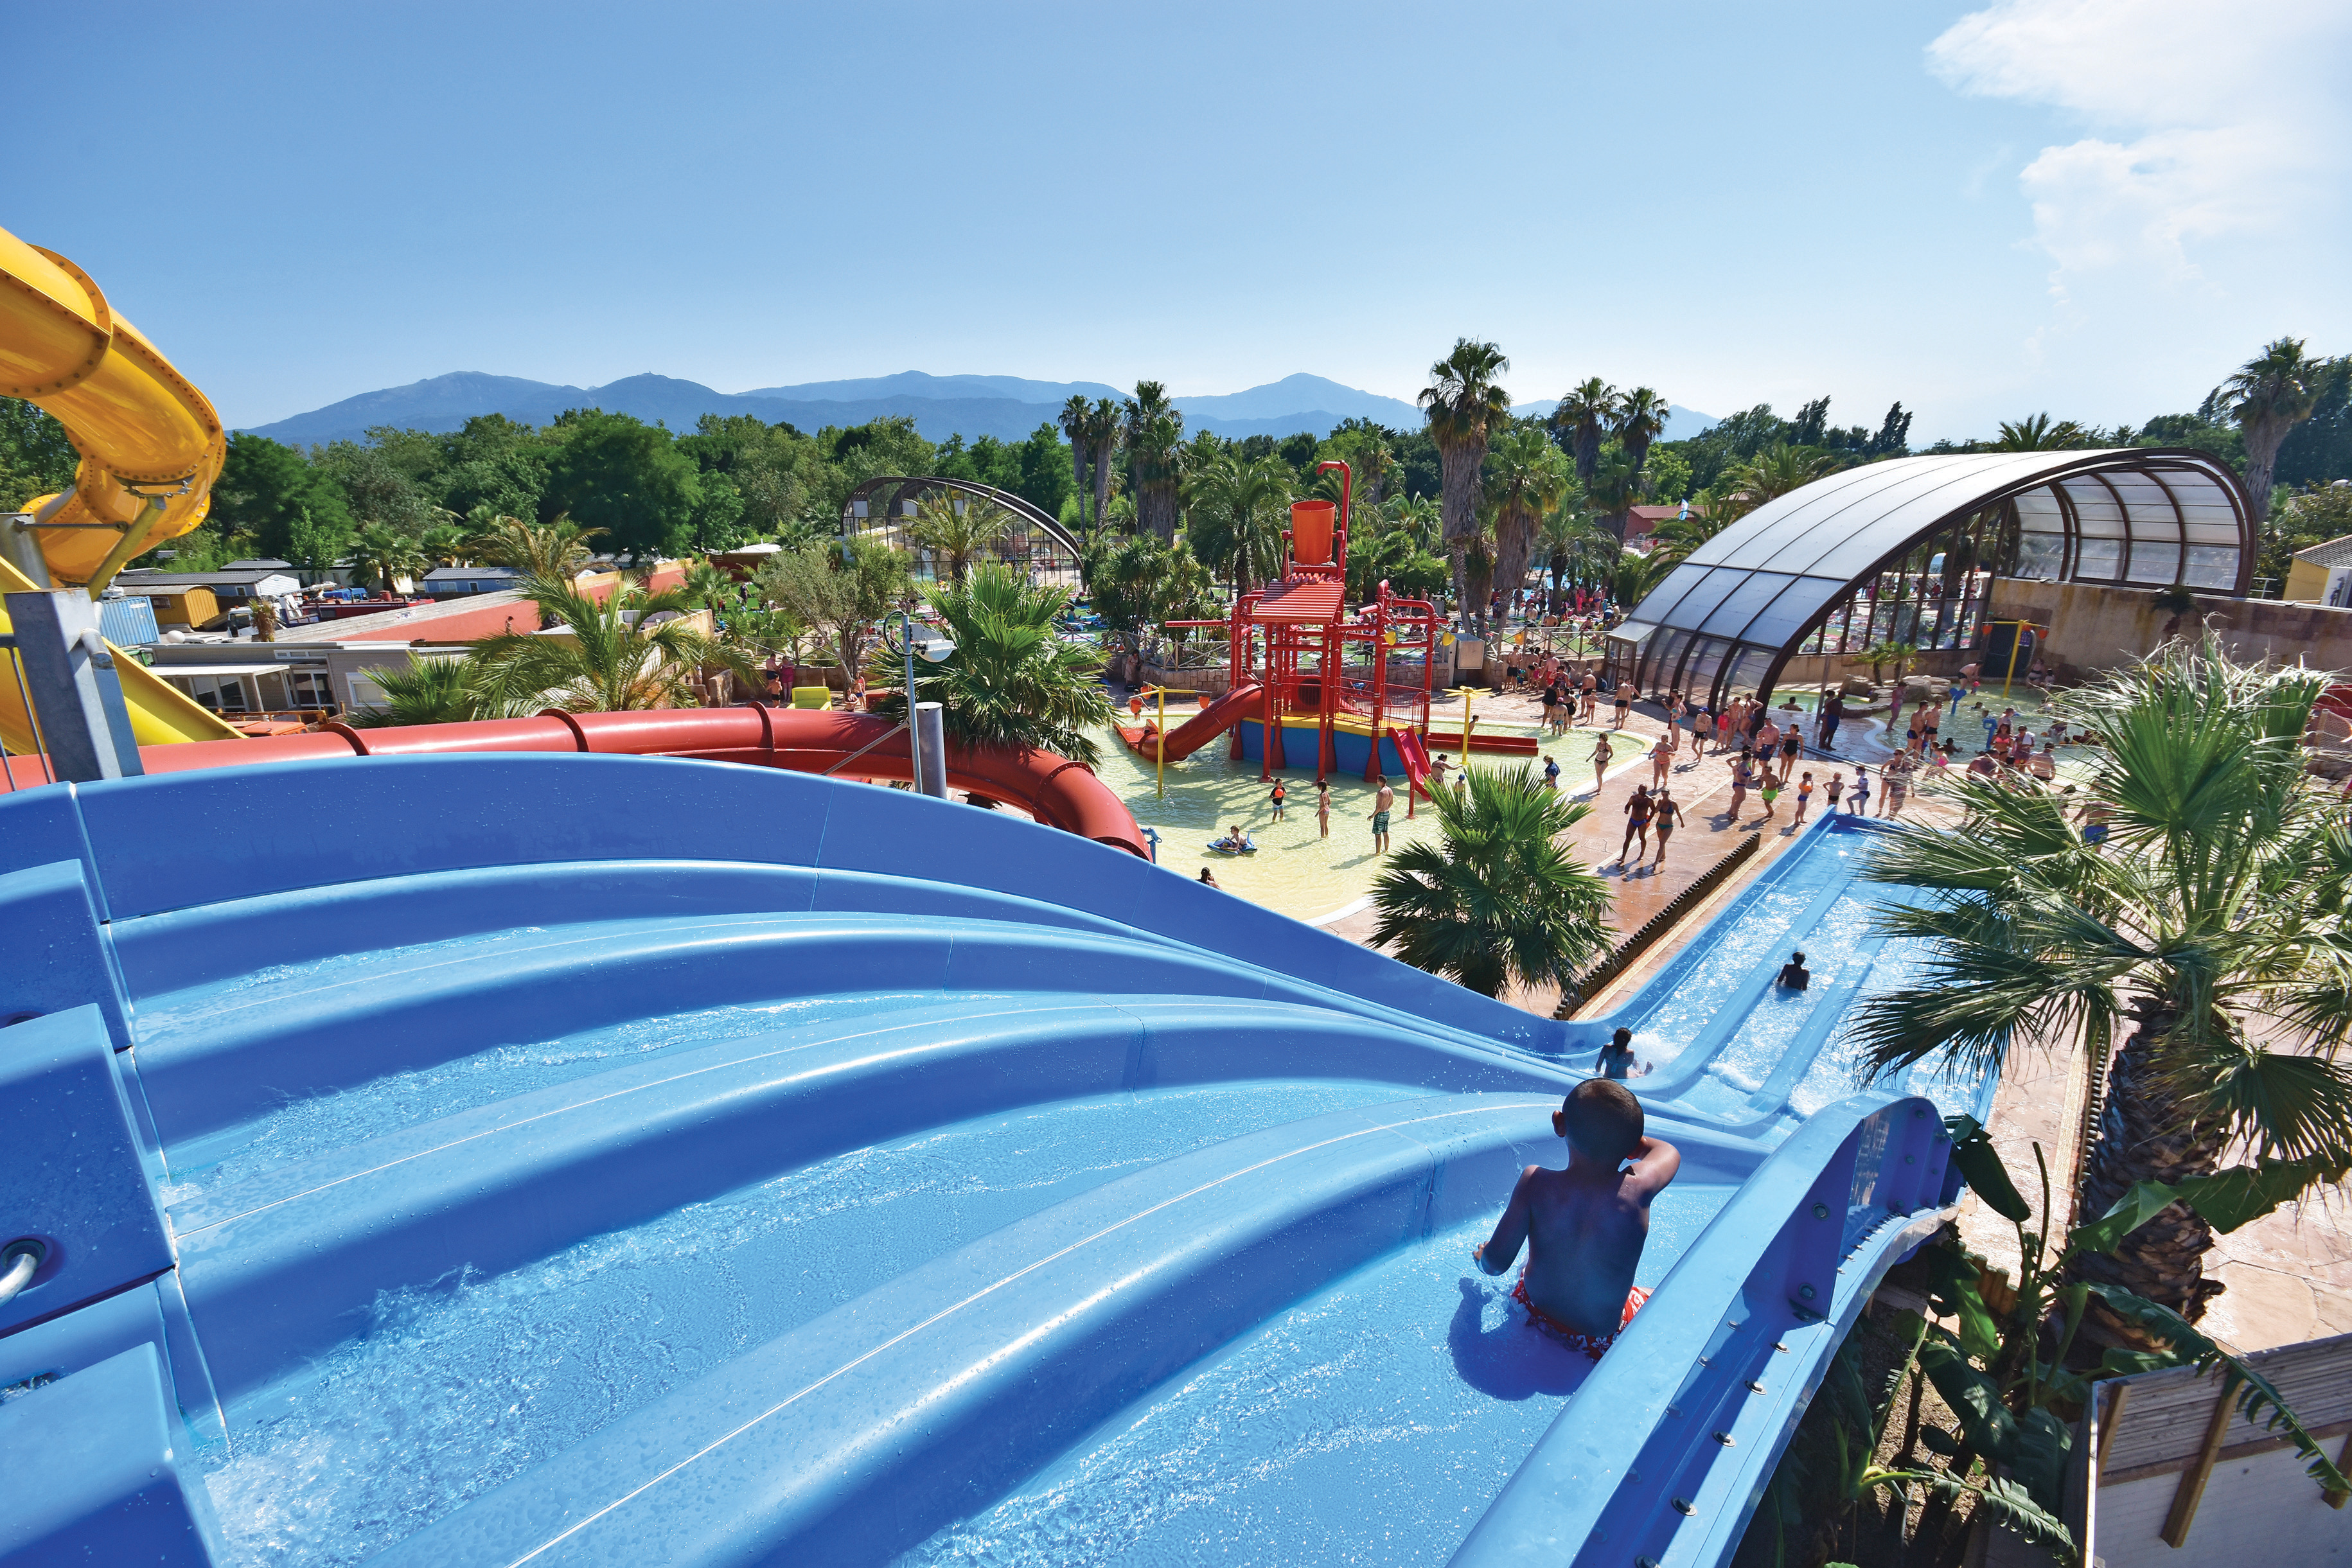 La Sirene is a holiday village that’s completely geared up for families with a 2,000 square metres of pool featuring more than a dozen slides